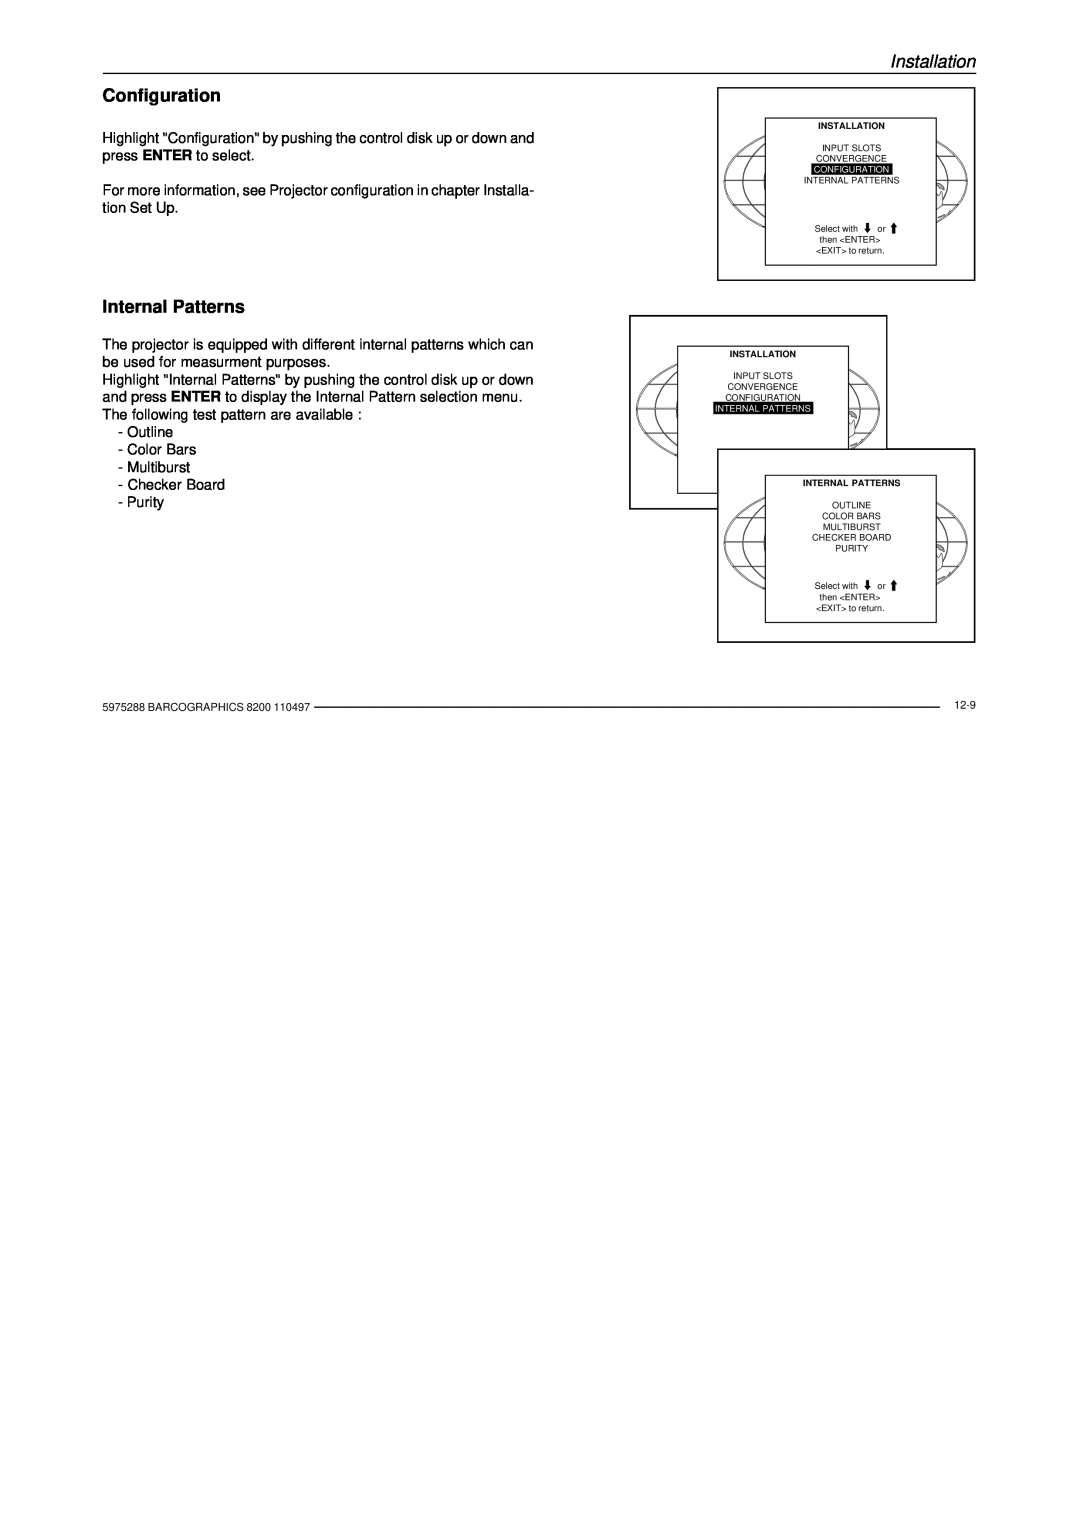 Barco R9001330 owner manual Configuration, Internal Patterns, Installation 